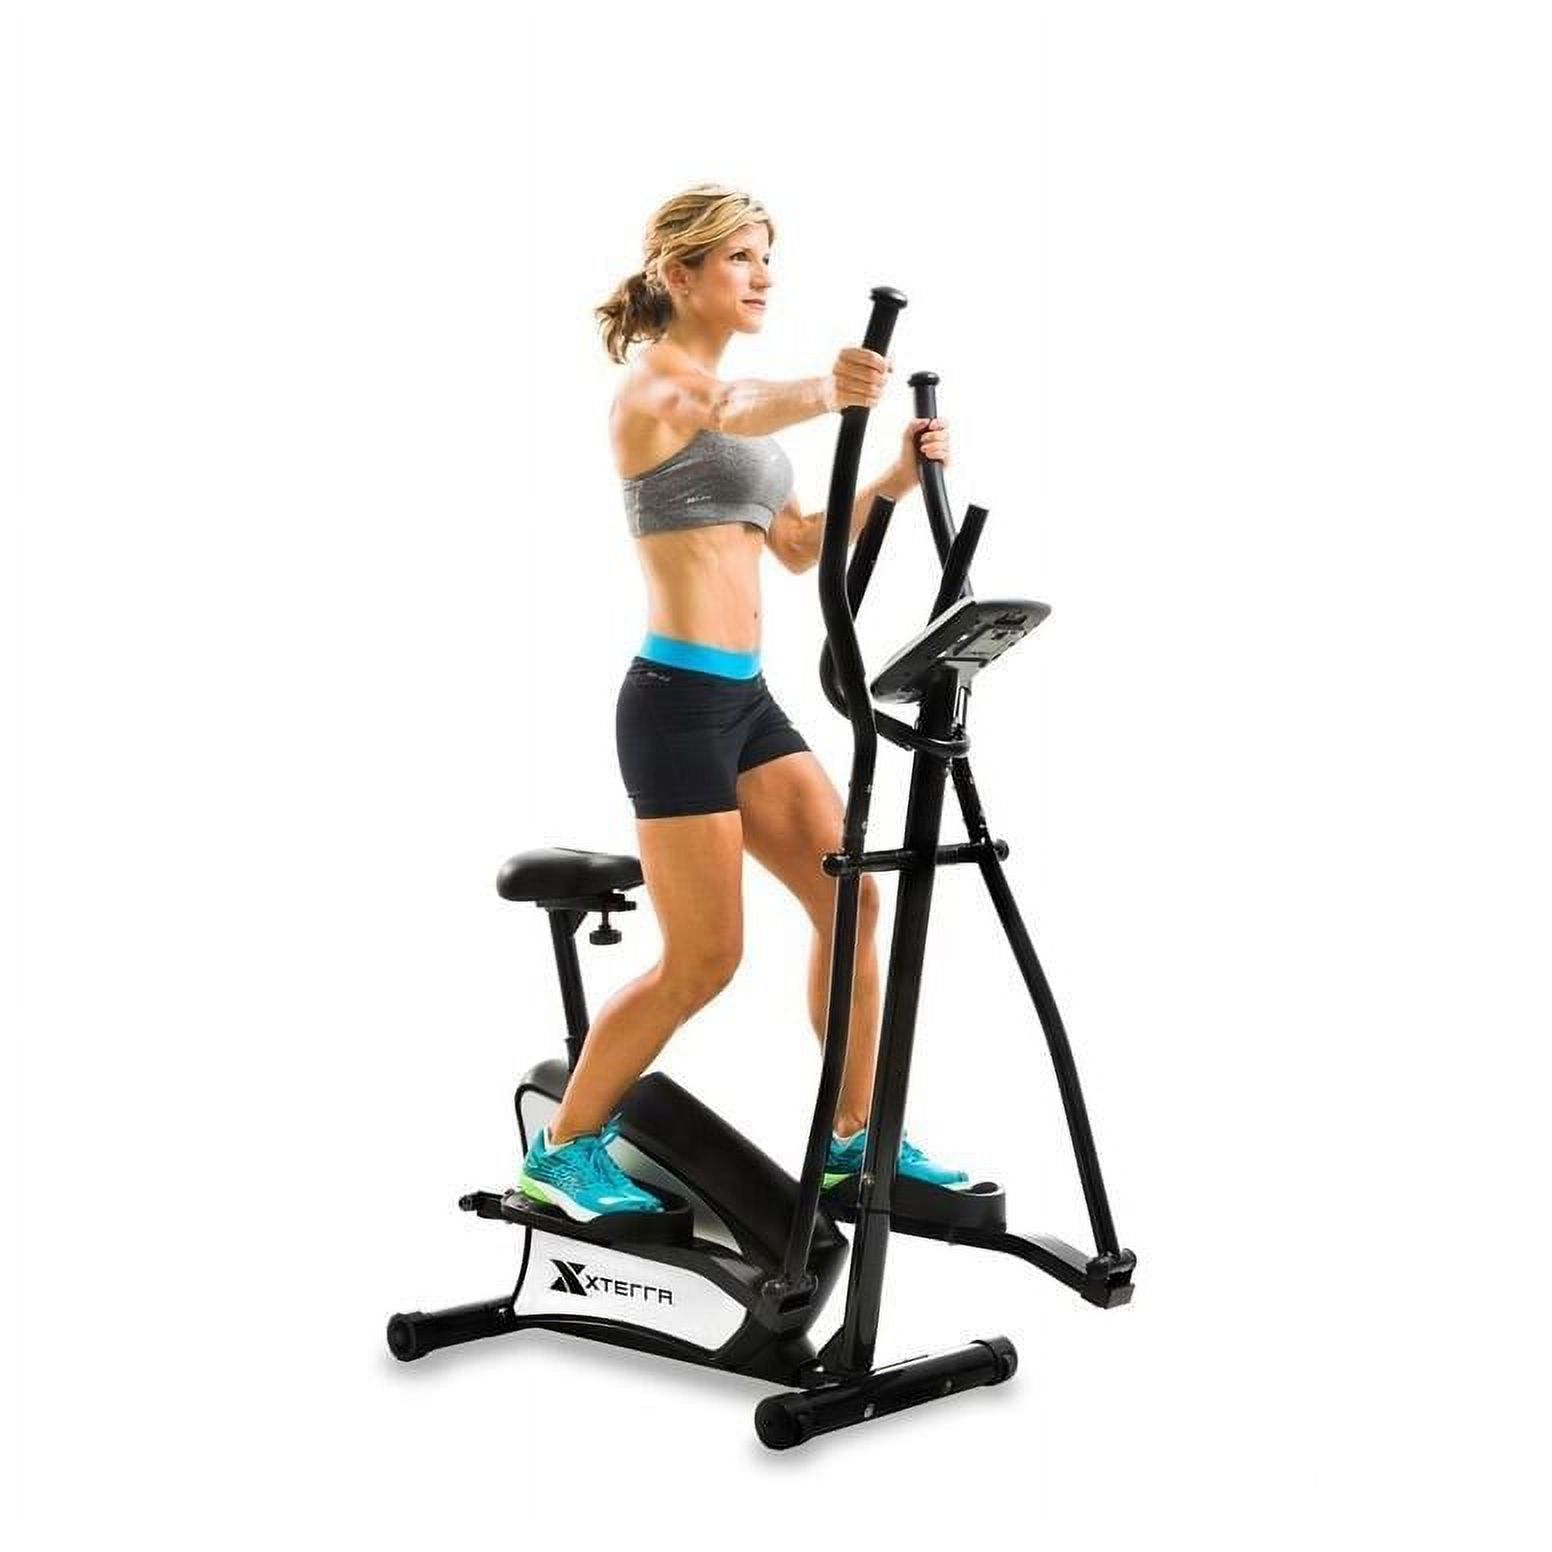 EU150 2-in-1 Hybrid Elliptical Upright Bike for Full Body Workout with 13" Stride, 265 lb Weight Limit - image 1 of 10